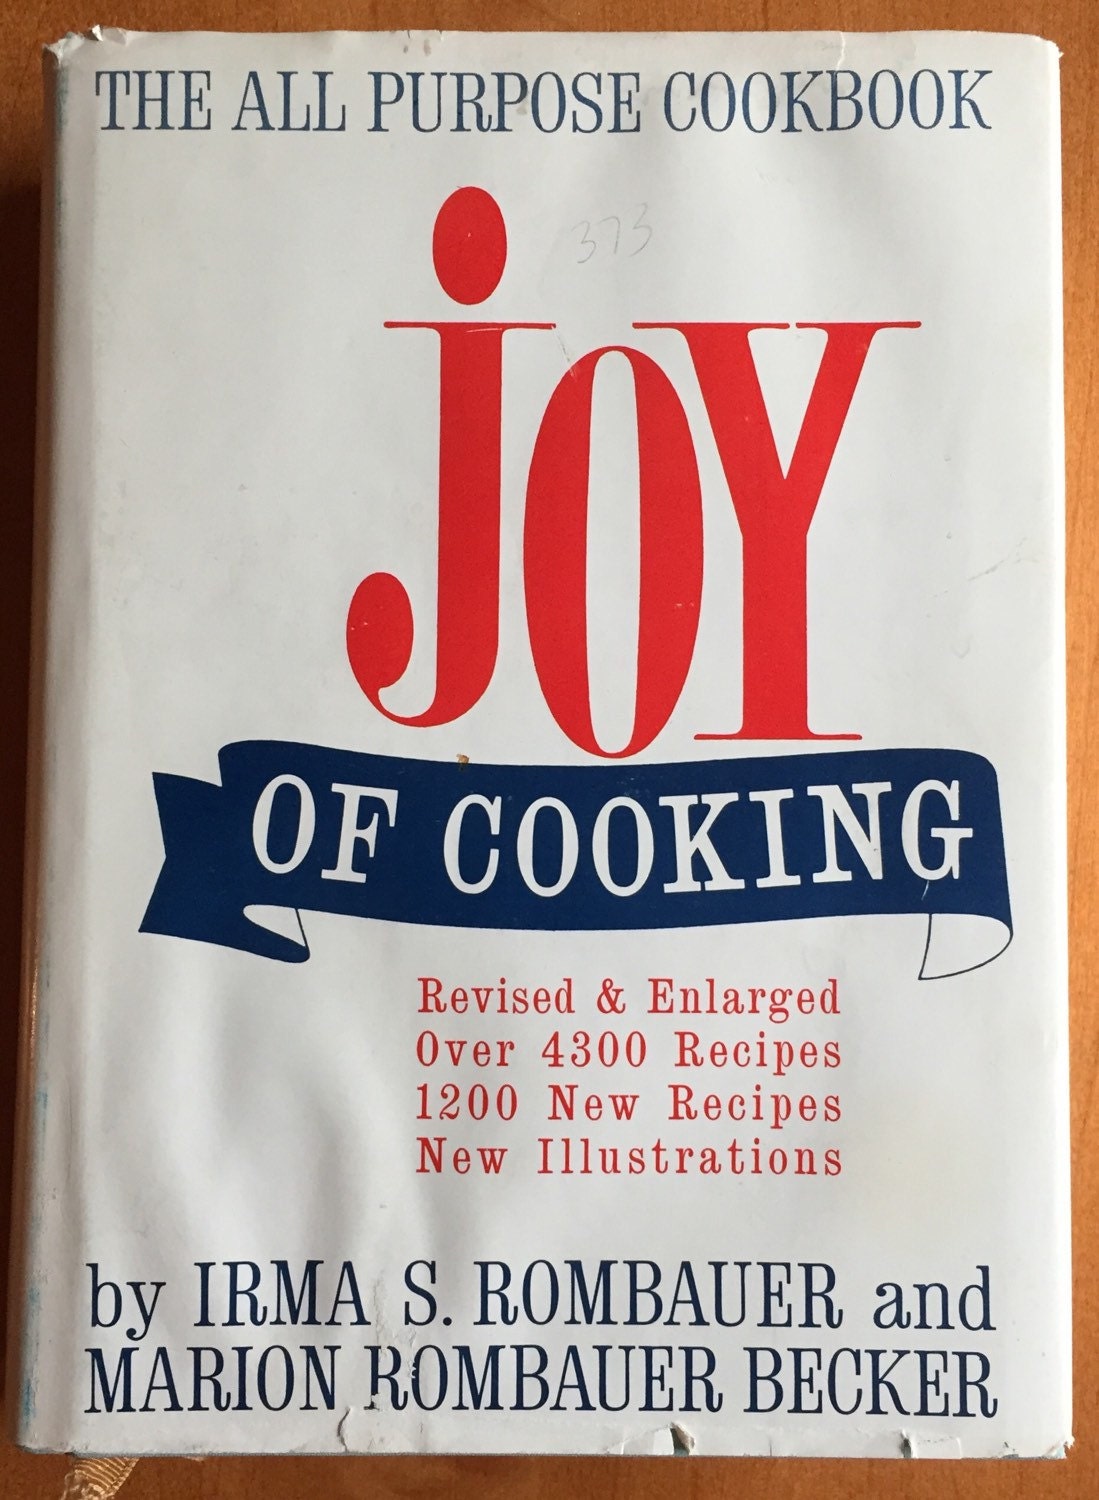 Joy of Cooking by Irma S. Rombauer